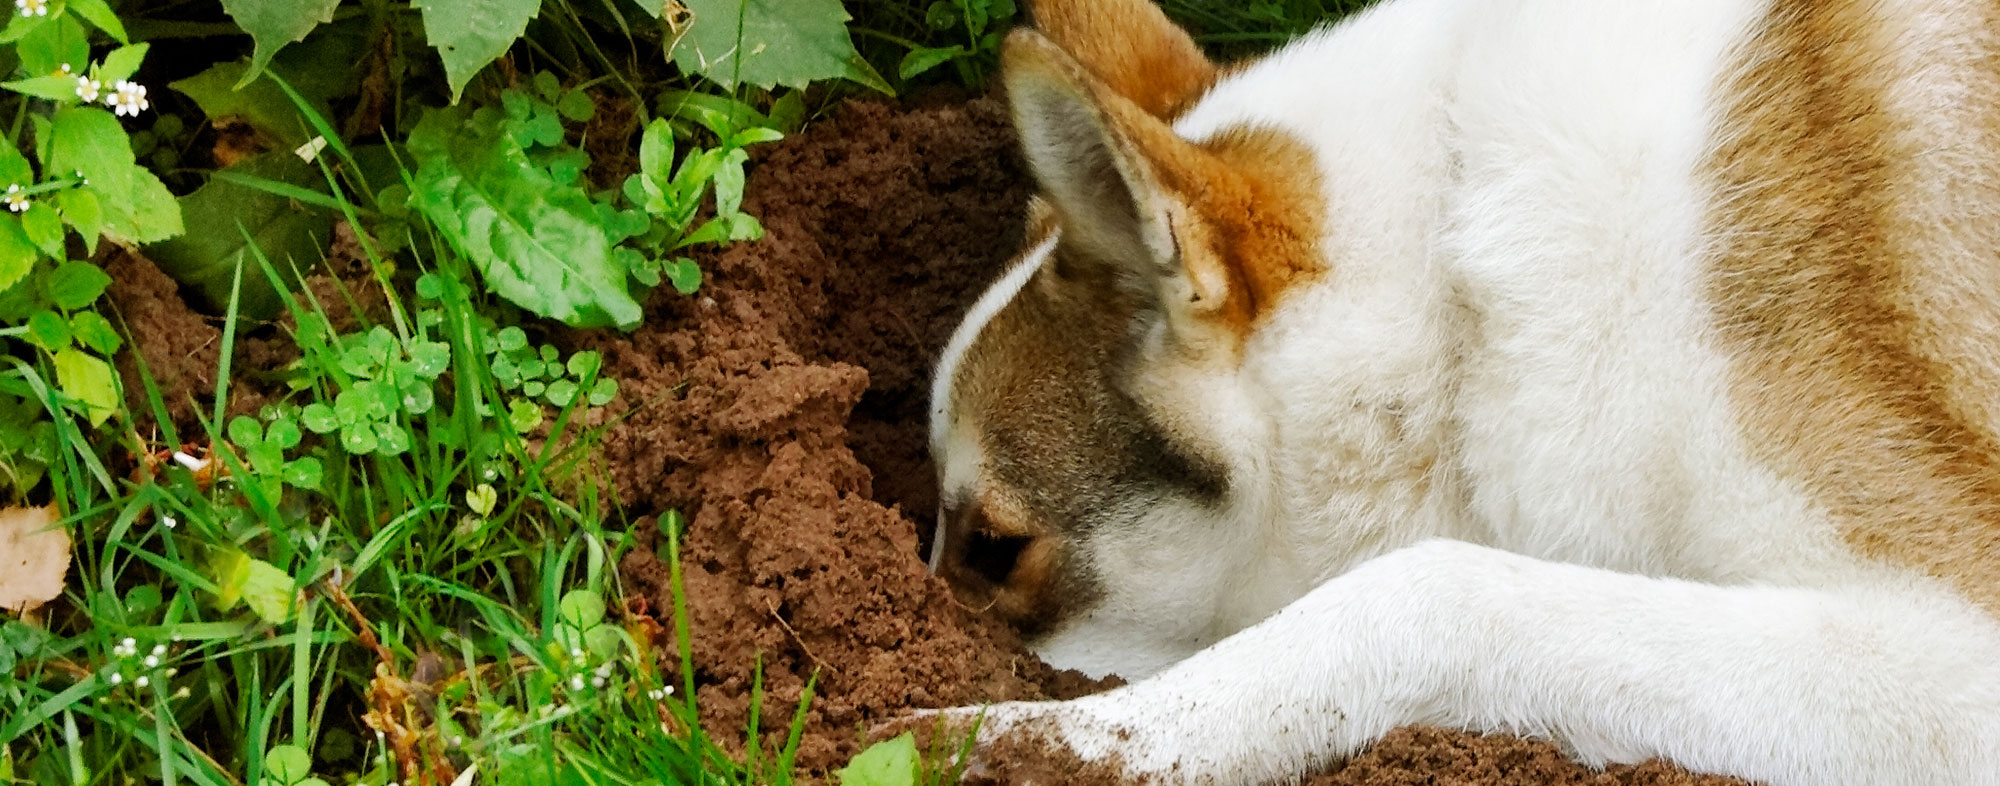 How to Keep Your Dogs from Digging in the Garden